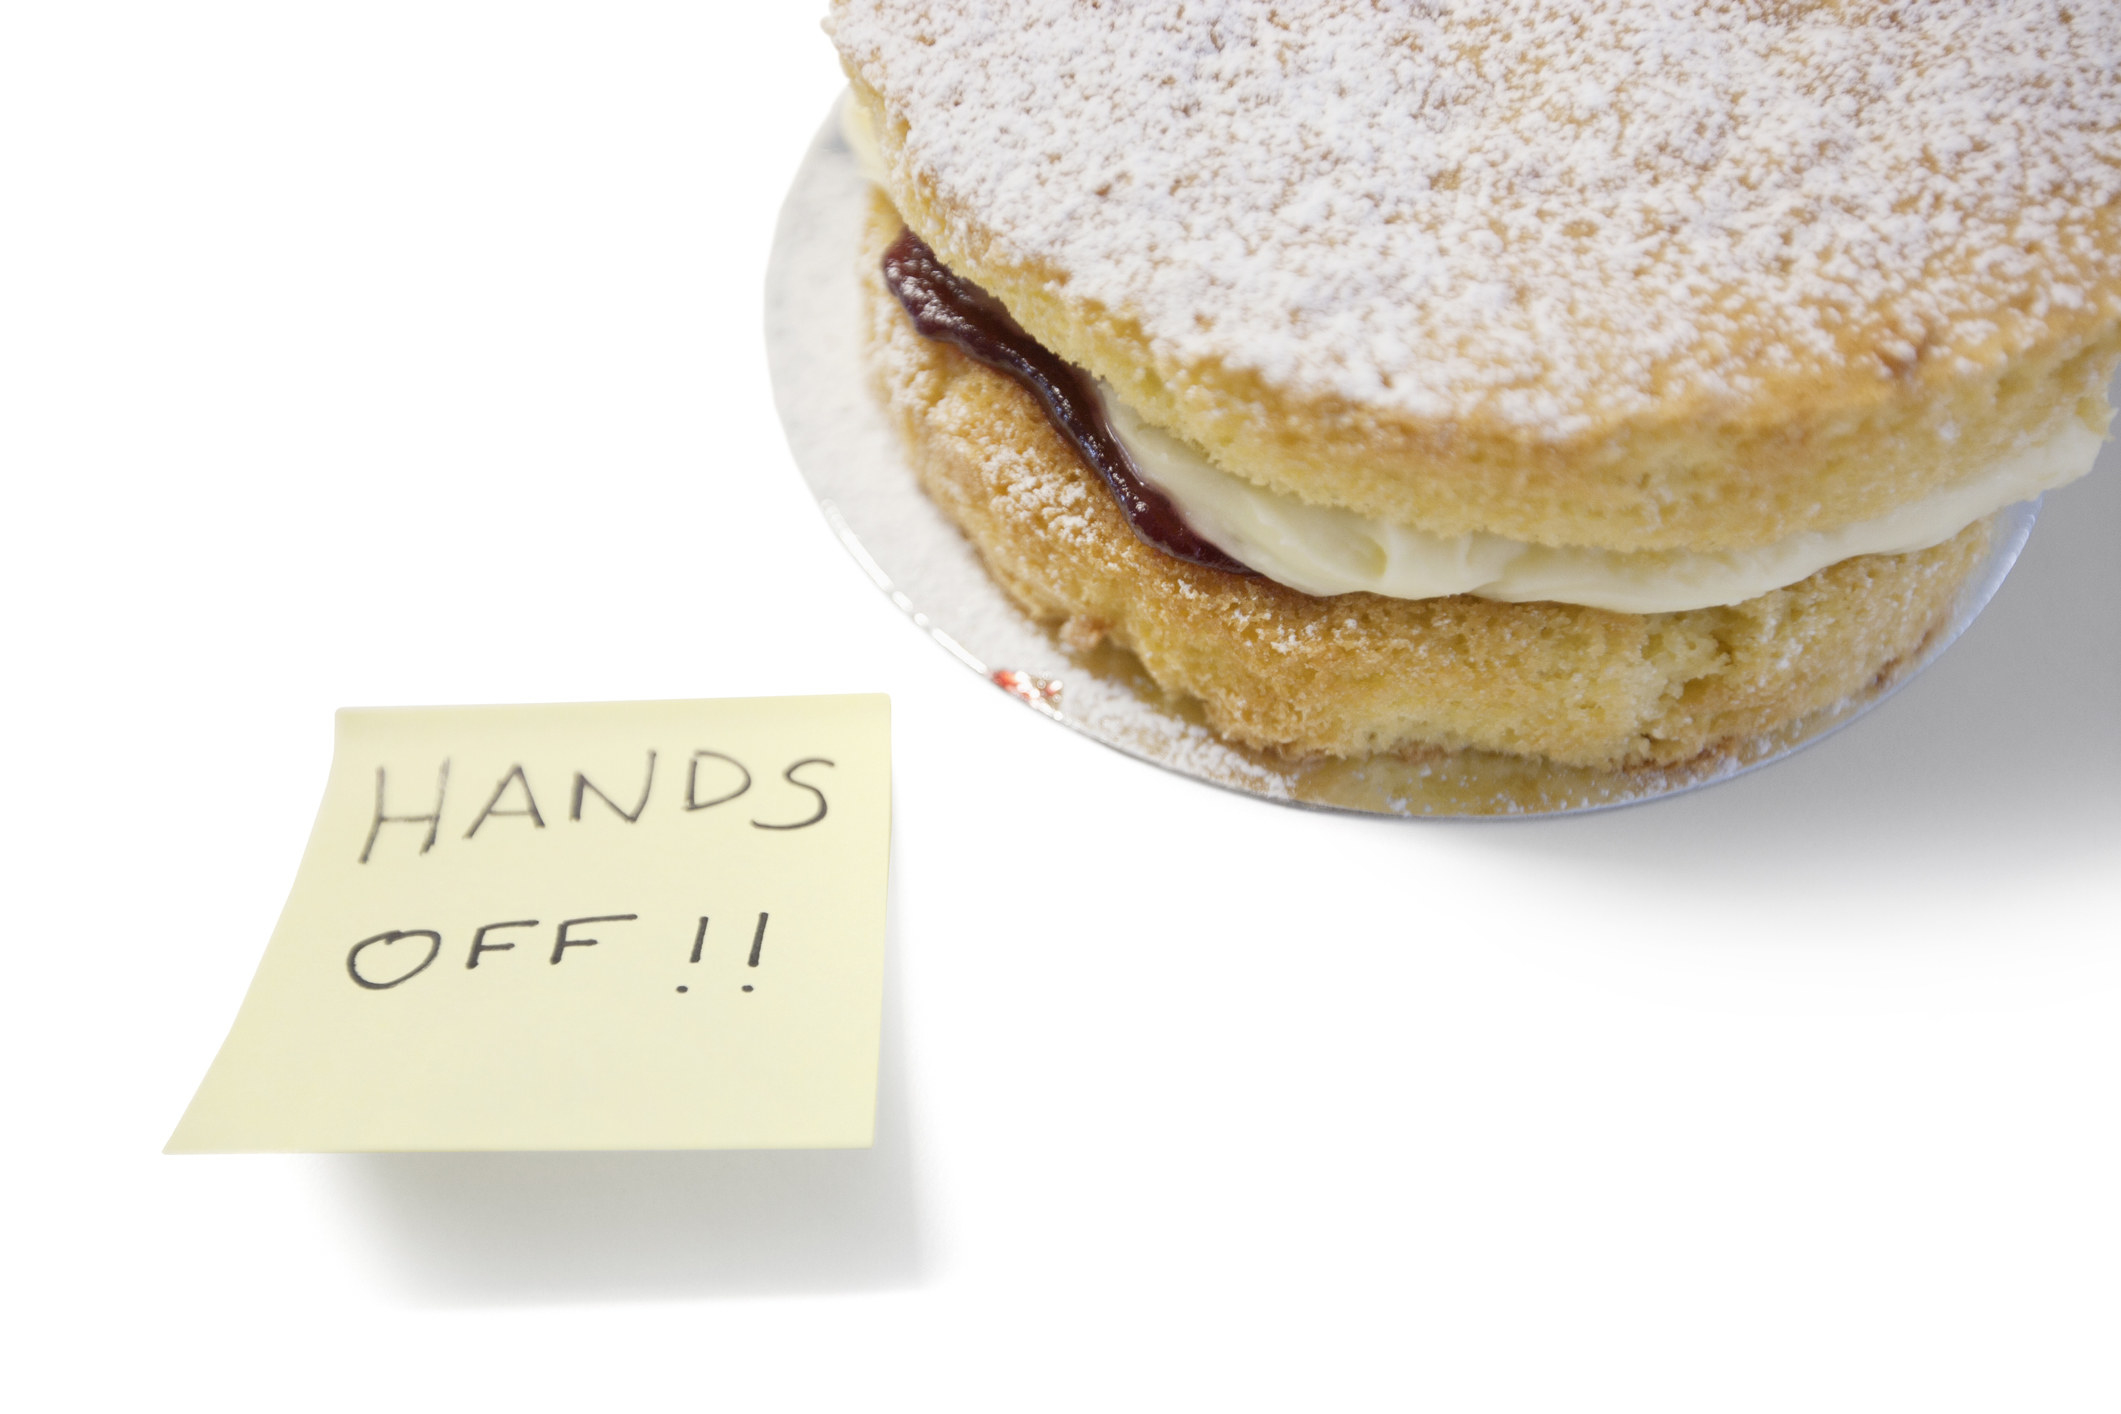 Sponge cake with &#x27;hands off&#x27; sign on a post-it note